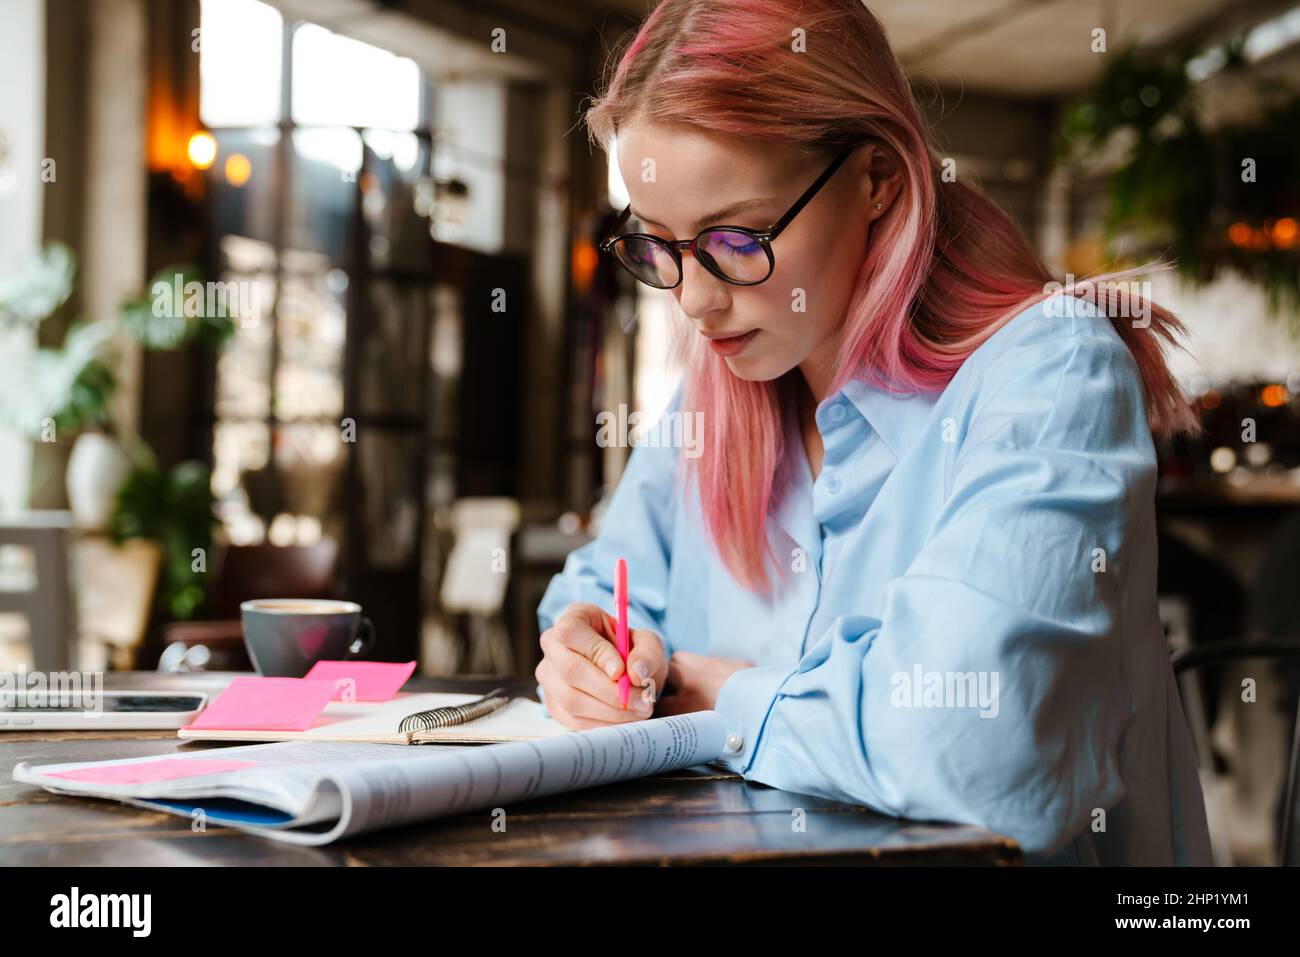 Young beautiful woman with pink hair studying and making notes while sitting in cafe Stock Photo